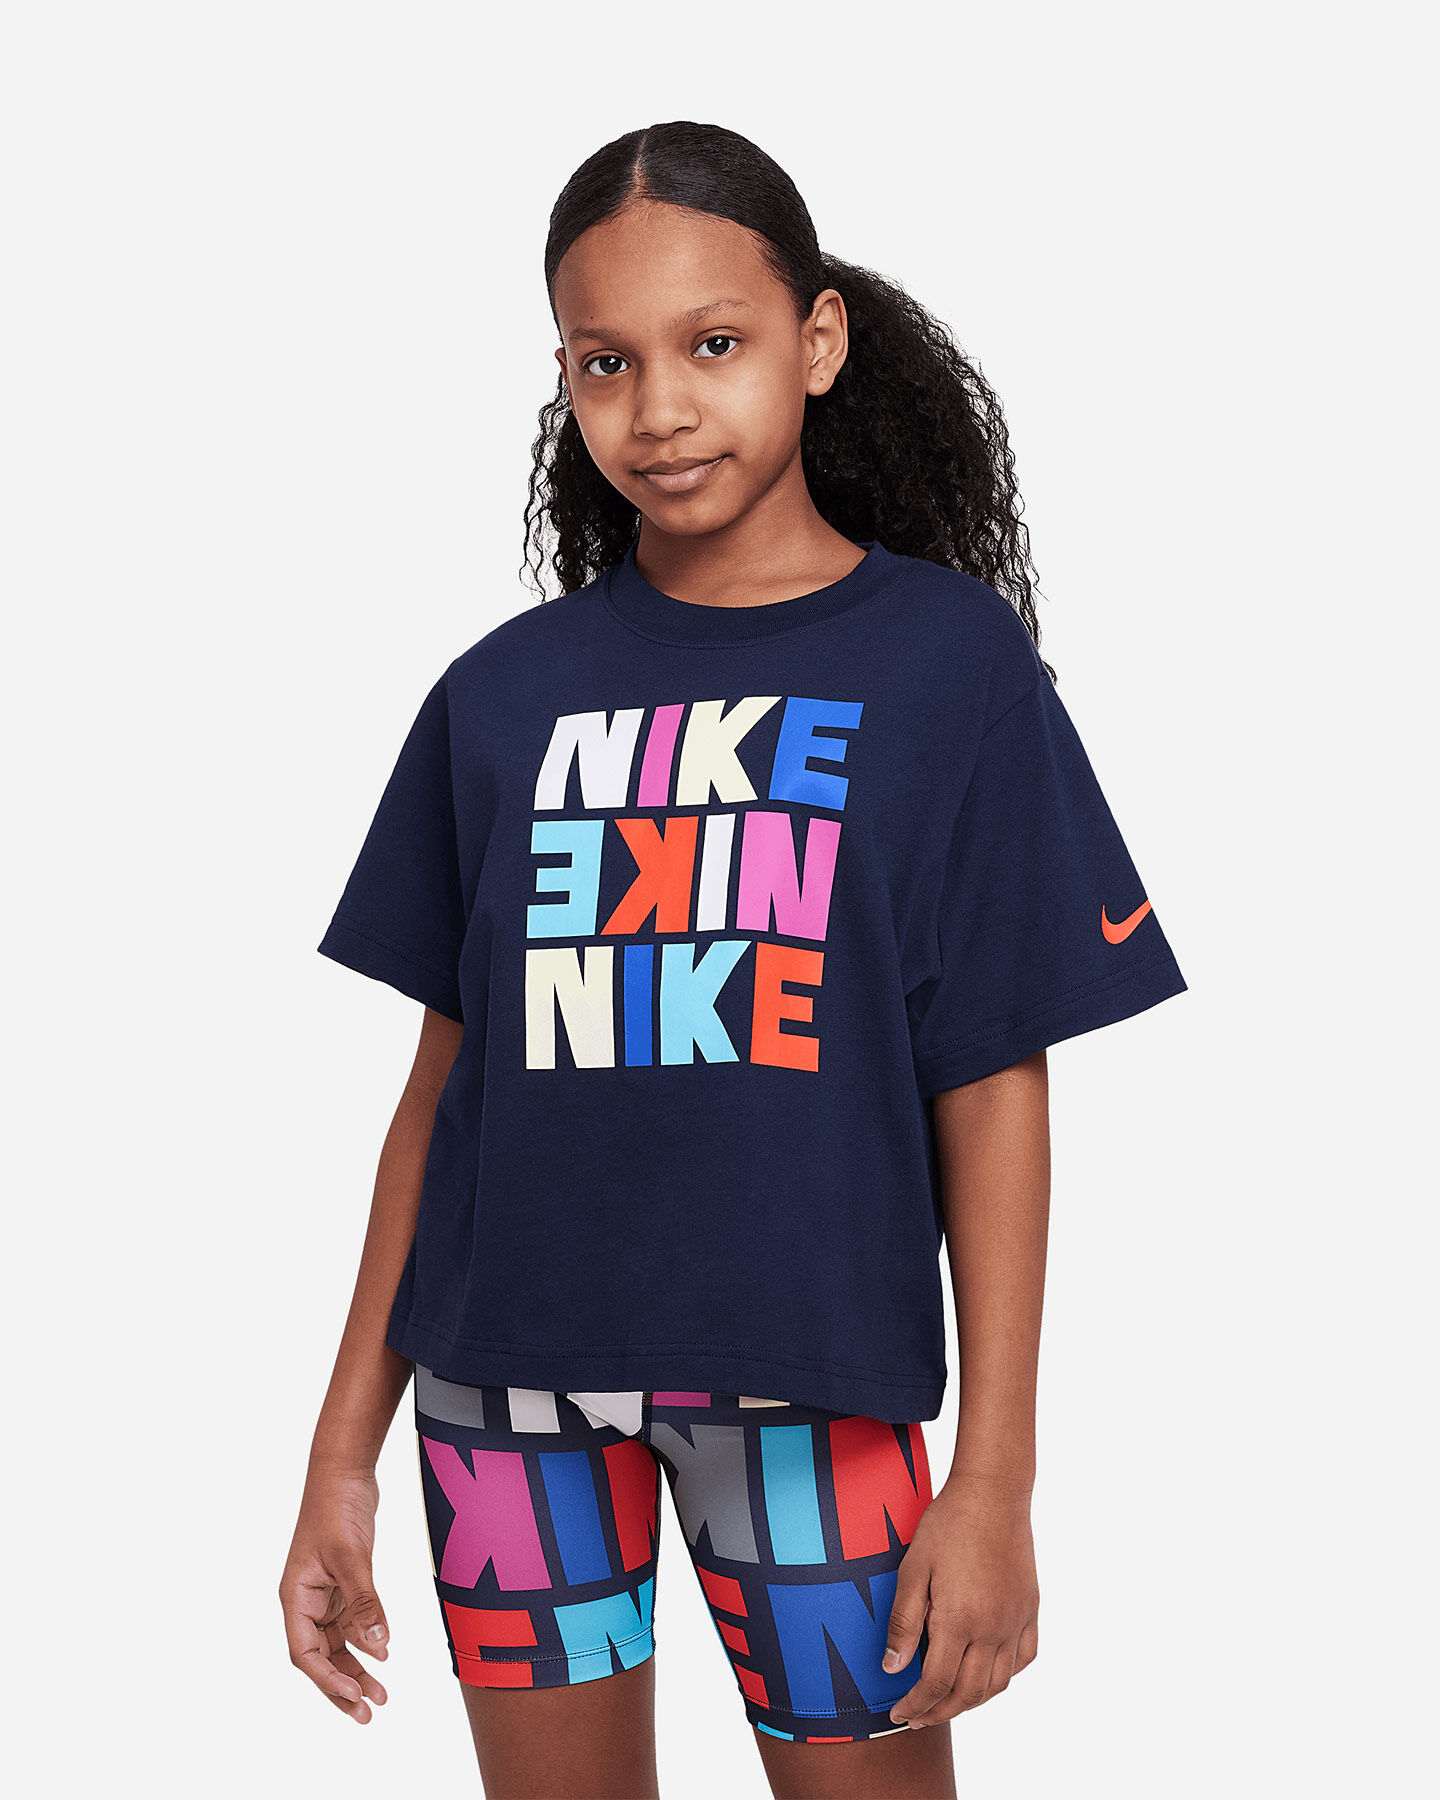  T-Shirt NIKE LETTERING JR S5539316|451|S scatto 0